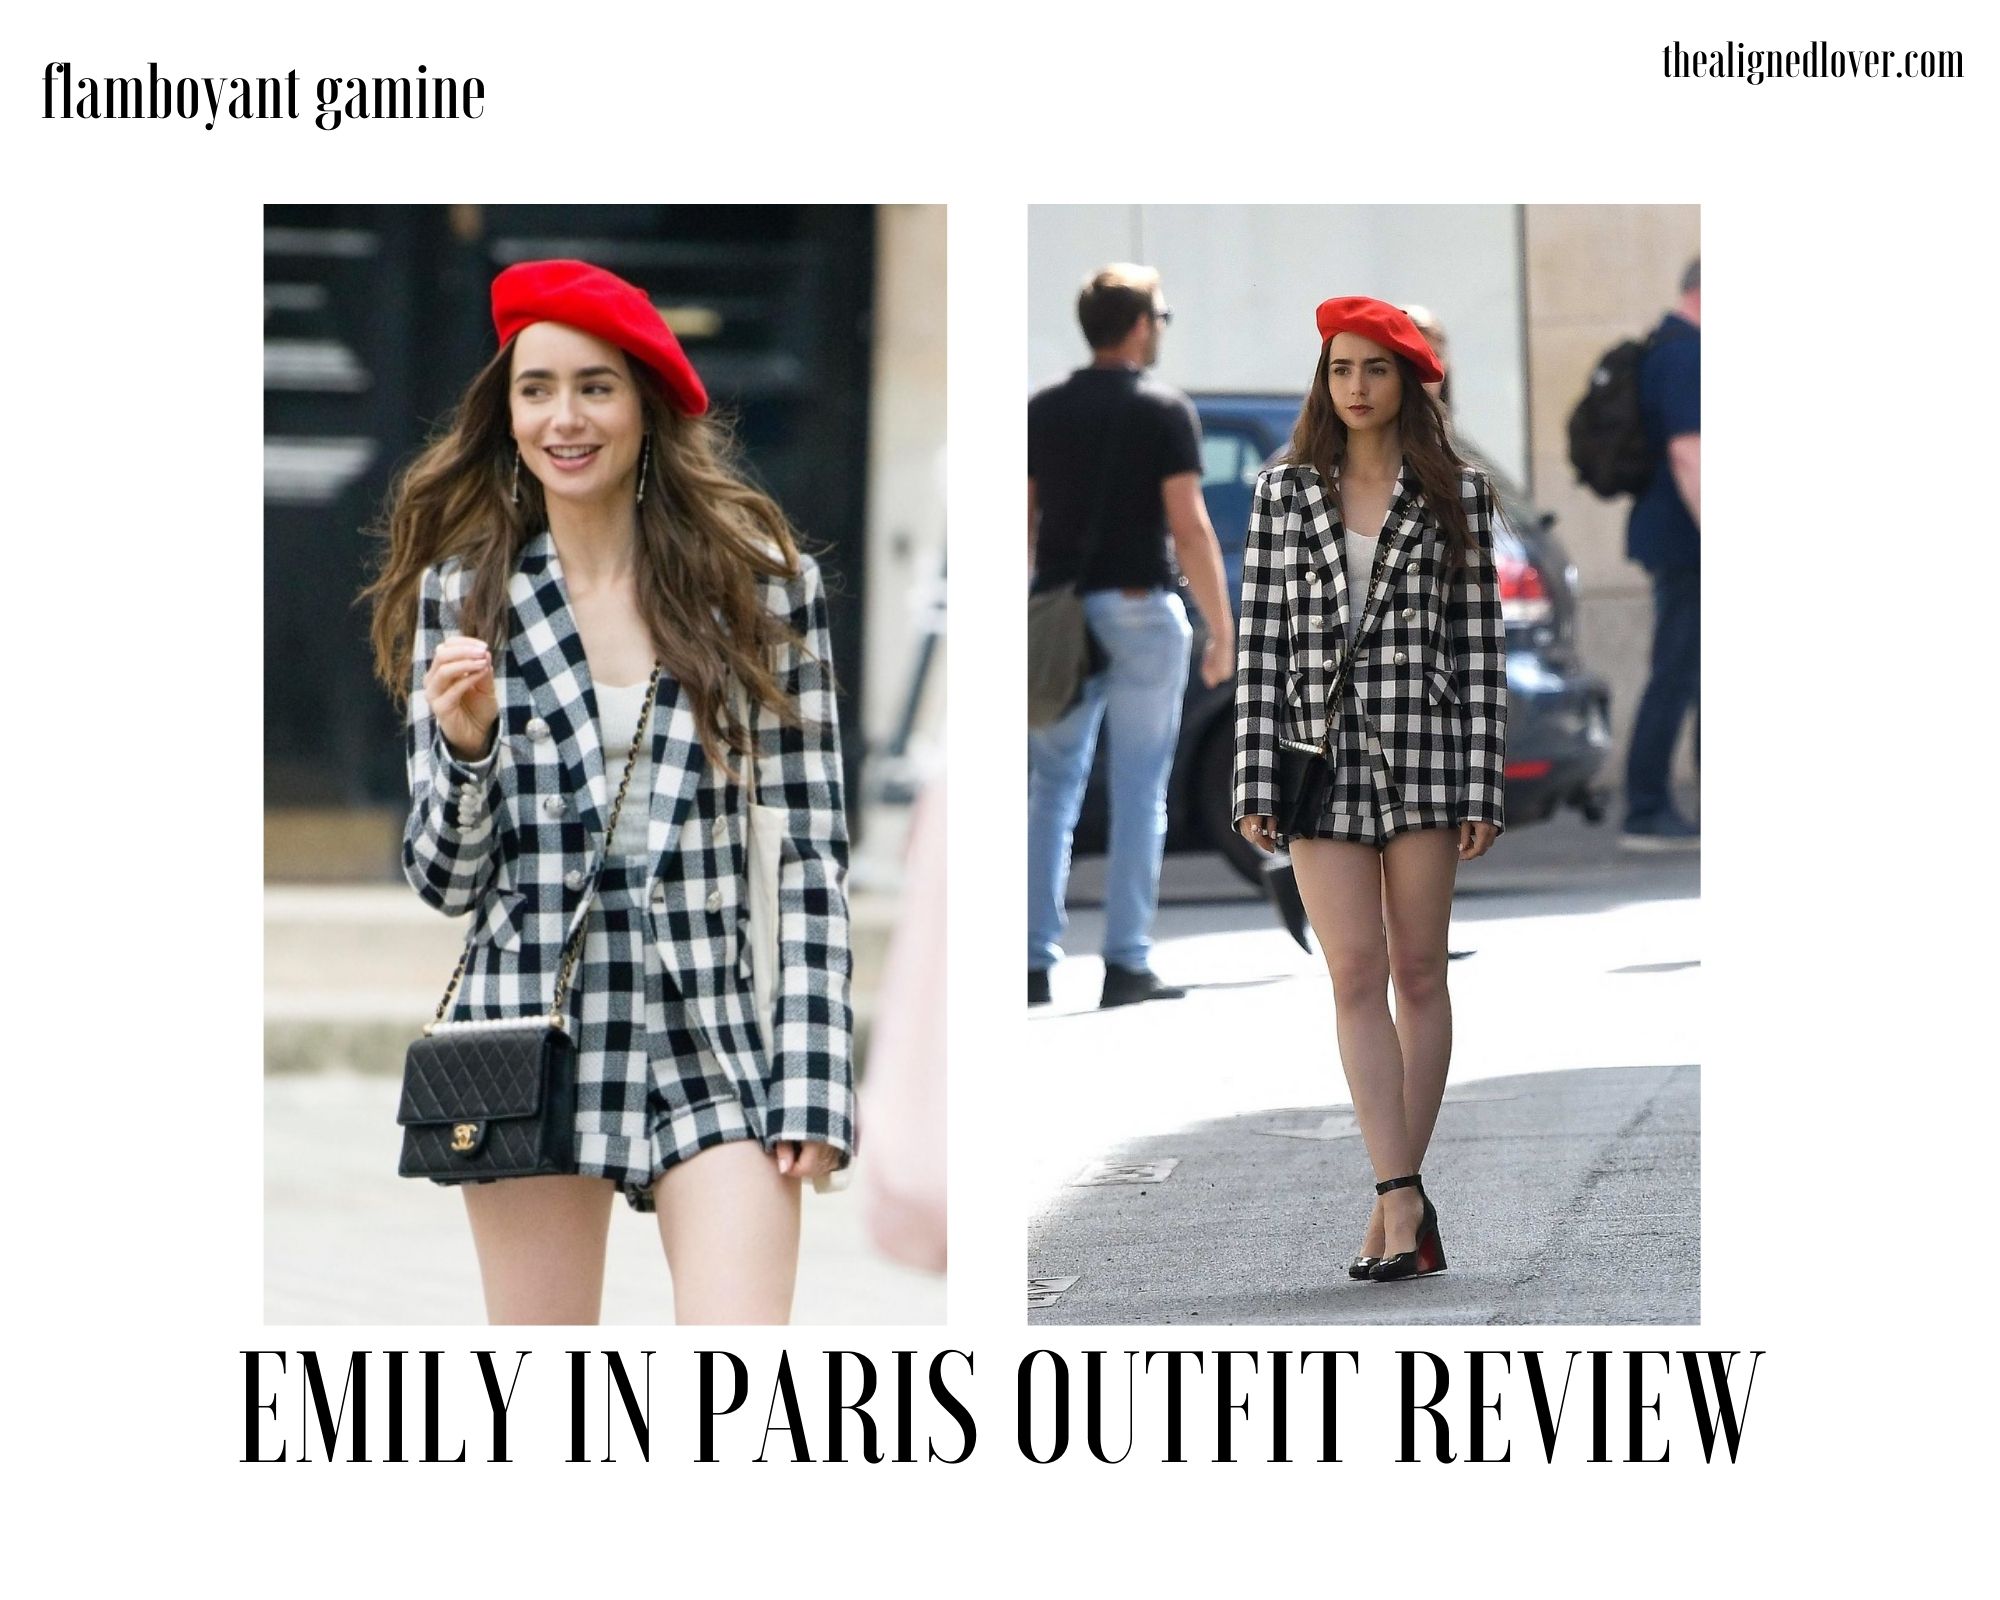 Emily In Paris Outfit Review Flamboyant Gamine The Aligned Lover